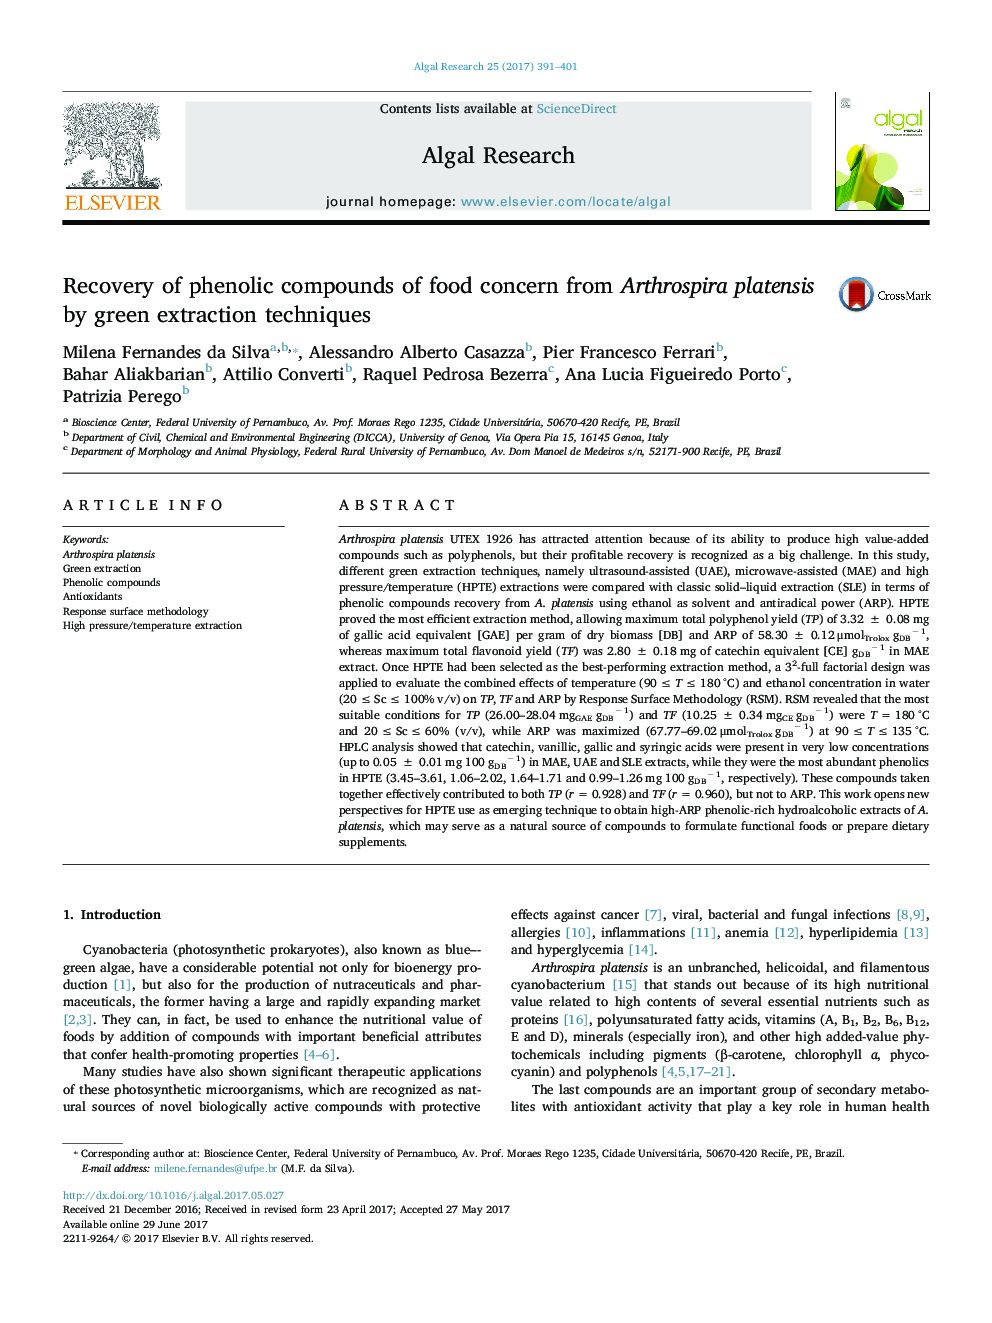 Recovery of phenolic compounds of food concern from Arthrospira platensis by green extraction techniques